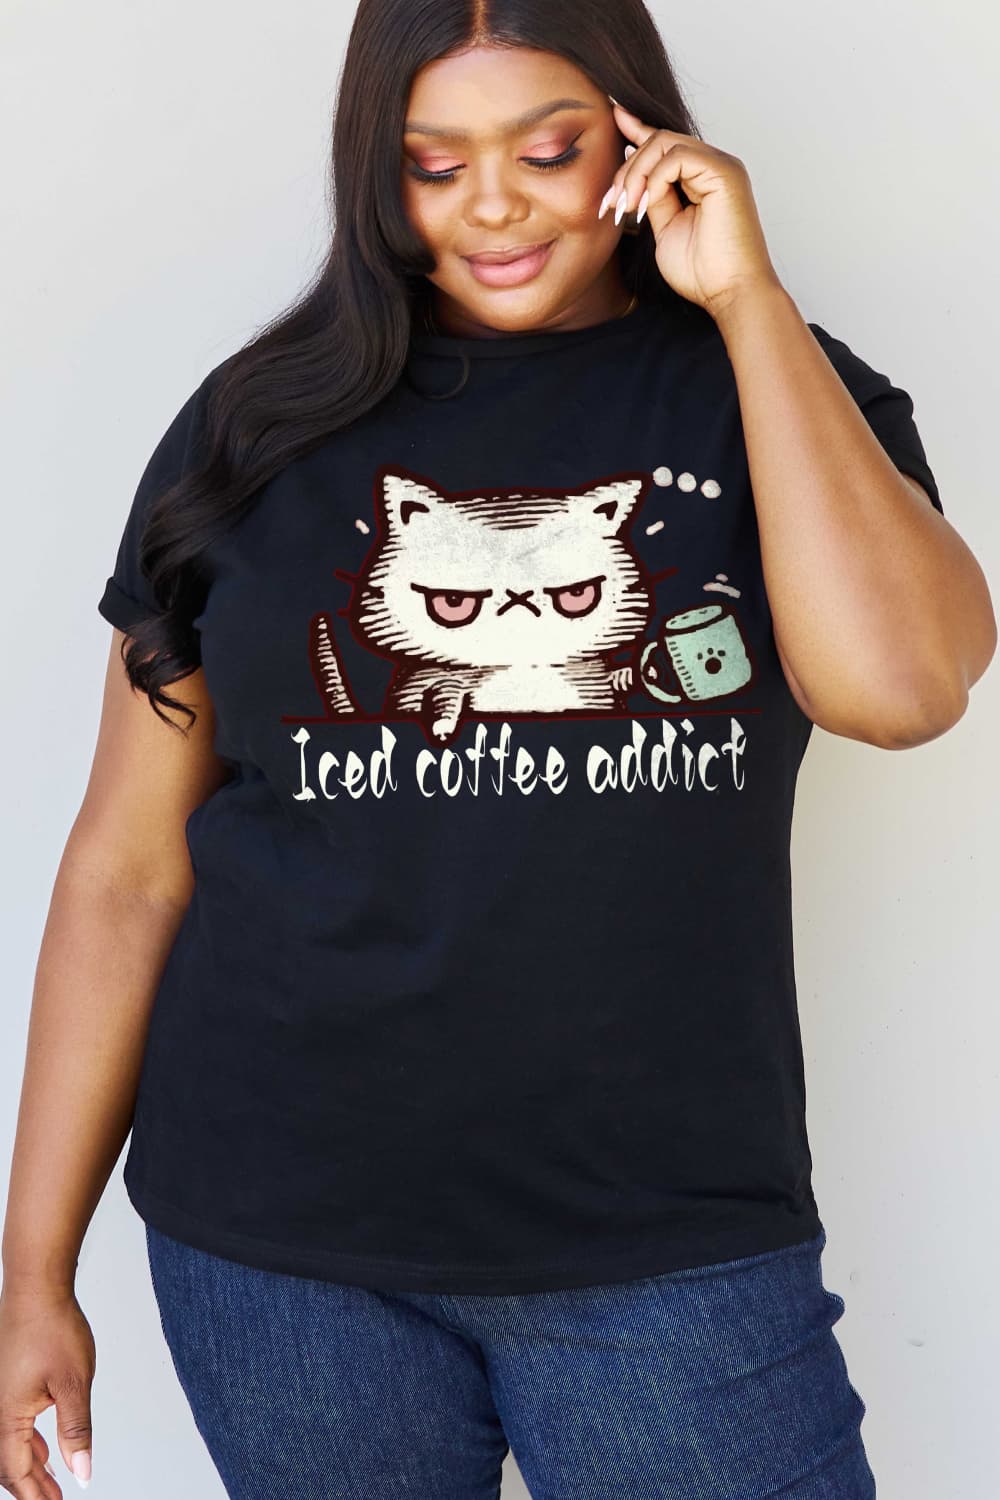 Simply Love Full Size ICED COFFEE ADDICT Graphic Cotton Tee